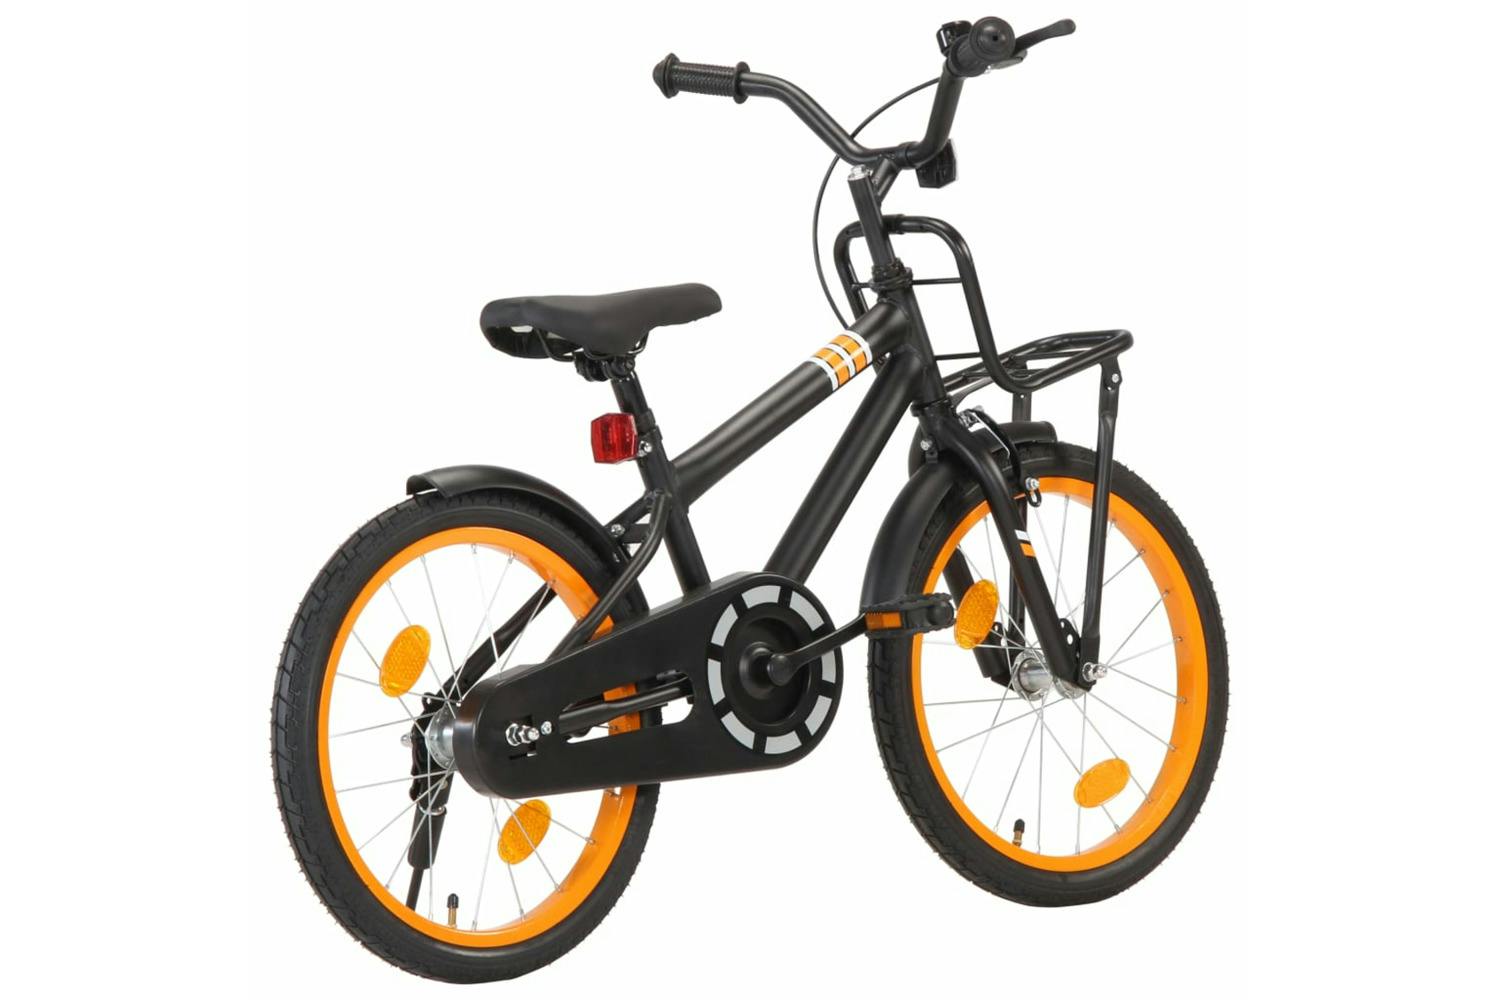 Vidaxl 92191 Kids Bike With Front Carrier 18 Inch Black And